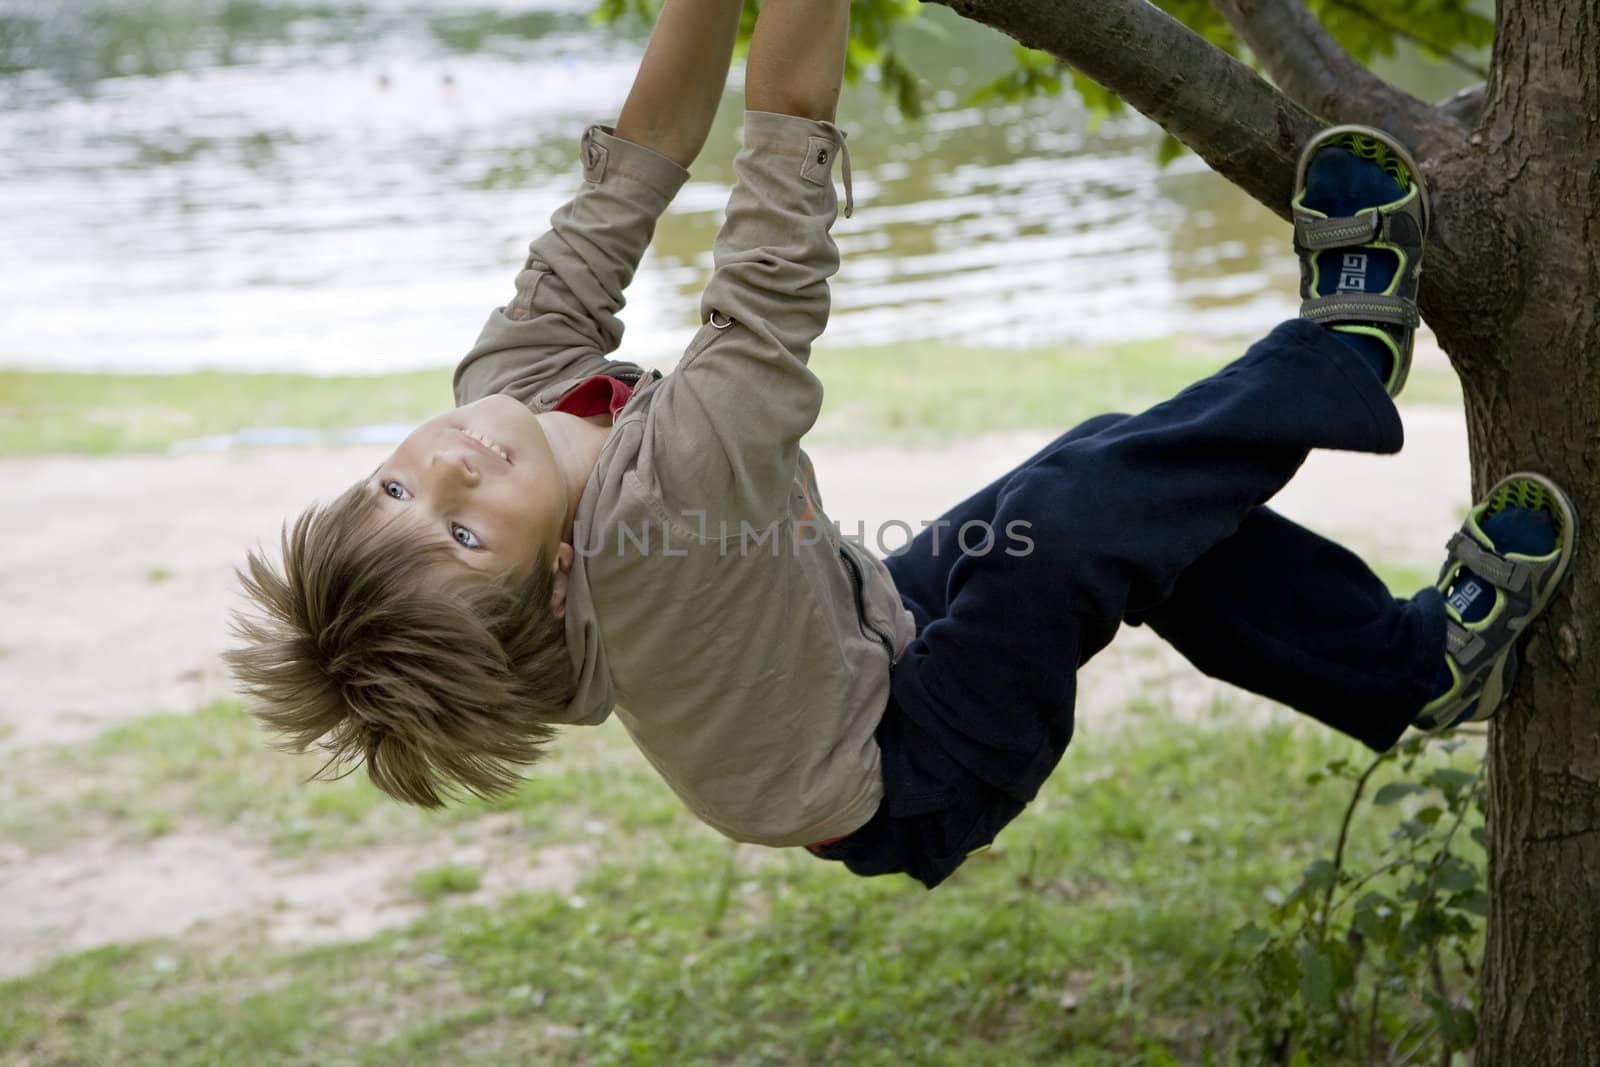 cute boy hanging from branch of tree. Summer time